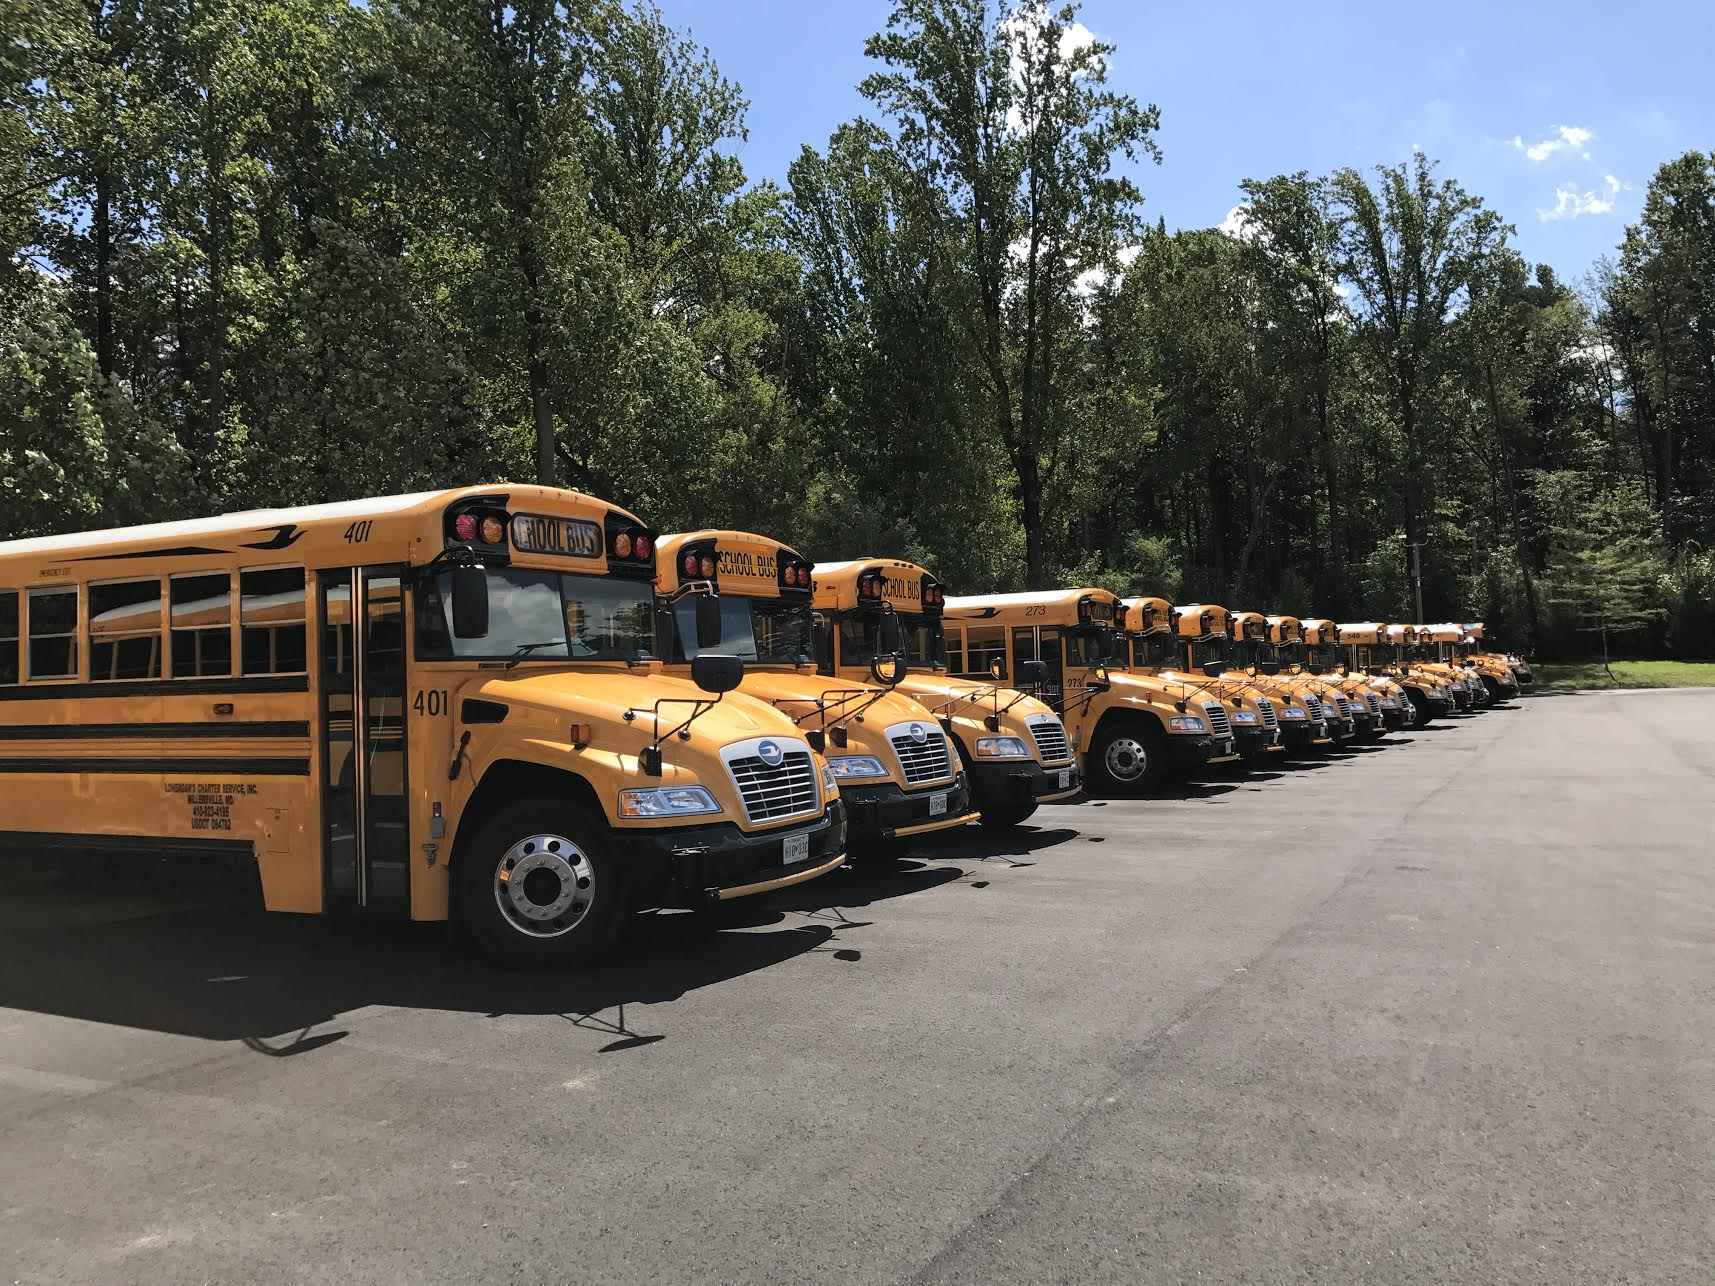 Charter Bus — Buses in Parking Lot in Millersville, MD